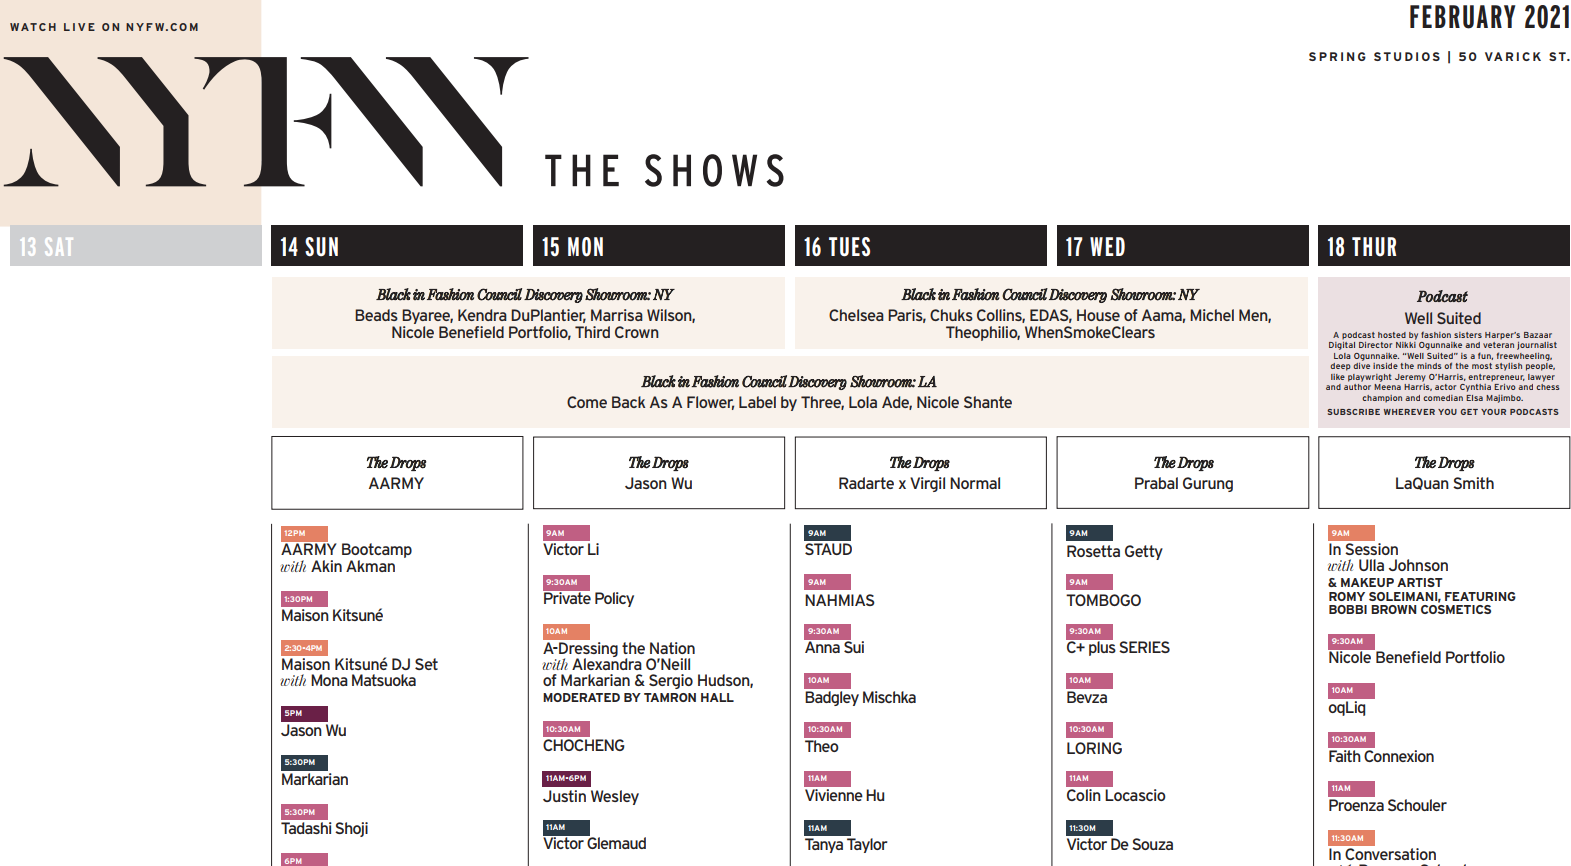 New York Fashion Week - NYFW The Shows - February 2021 Schedule